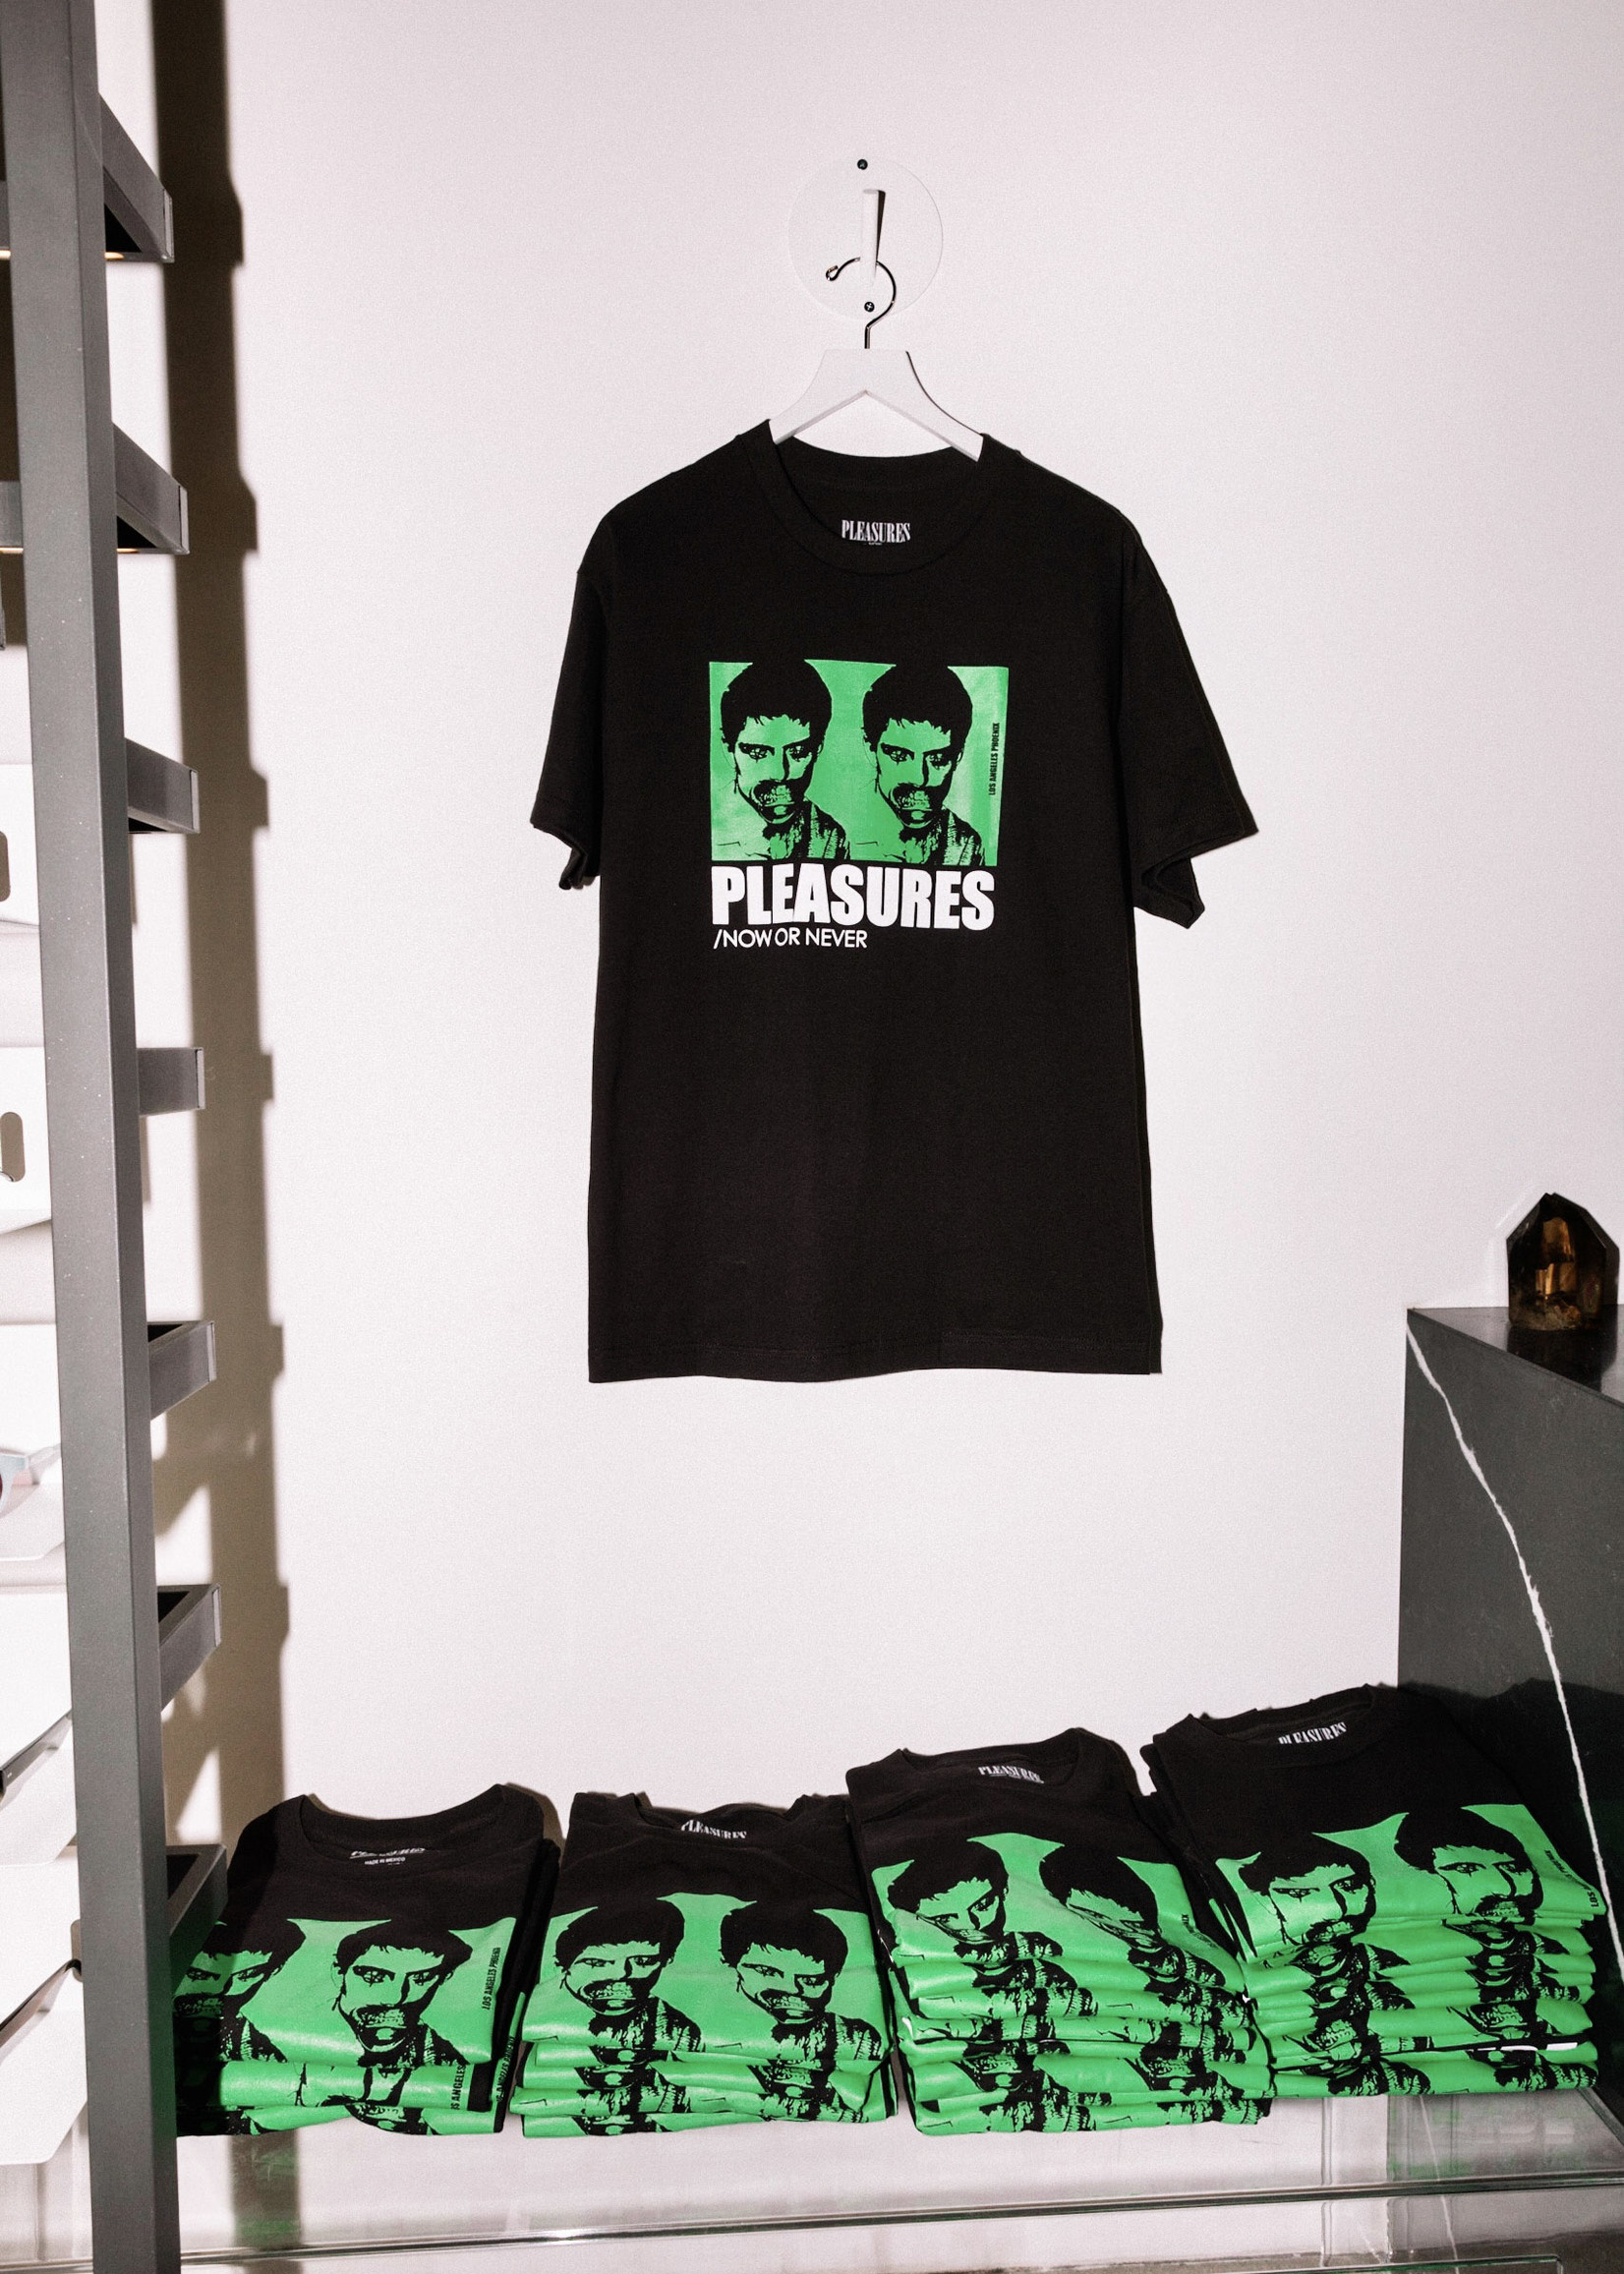 PLEASURES PLEASURES X NOW OR NEVER Limited Edition T-shirt